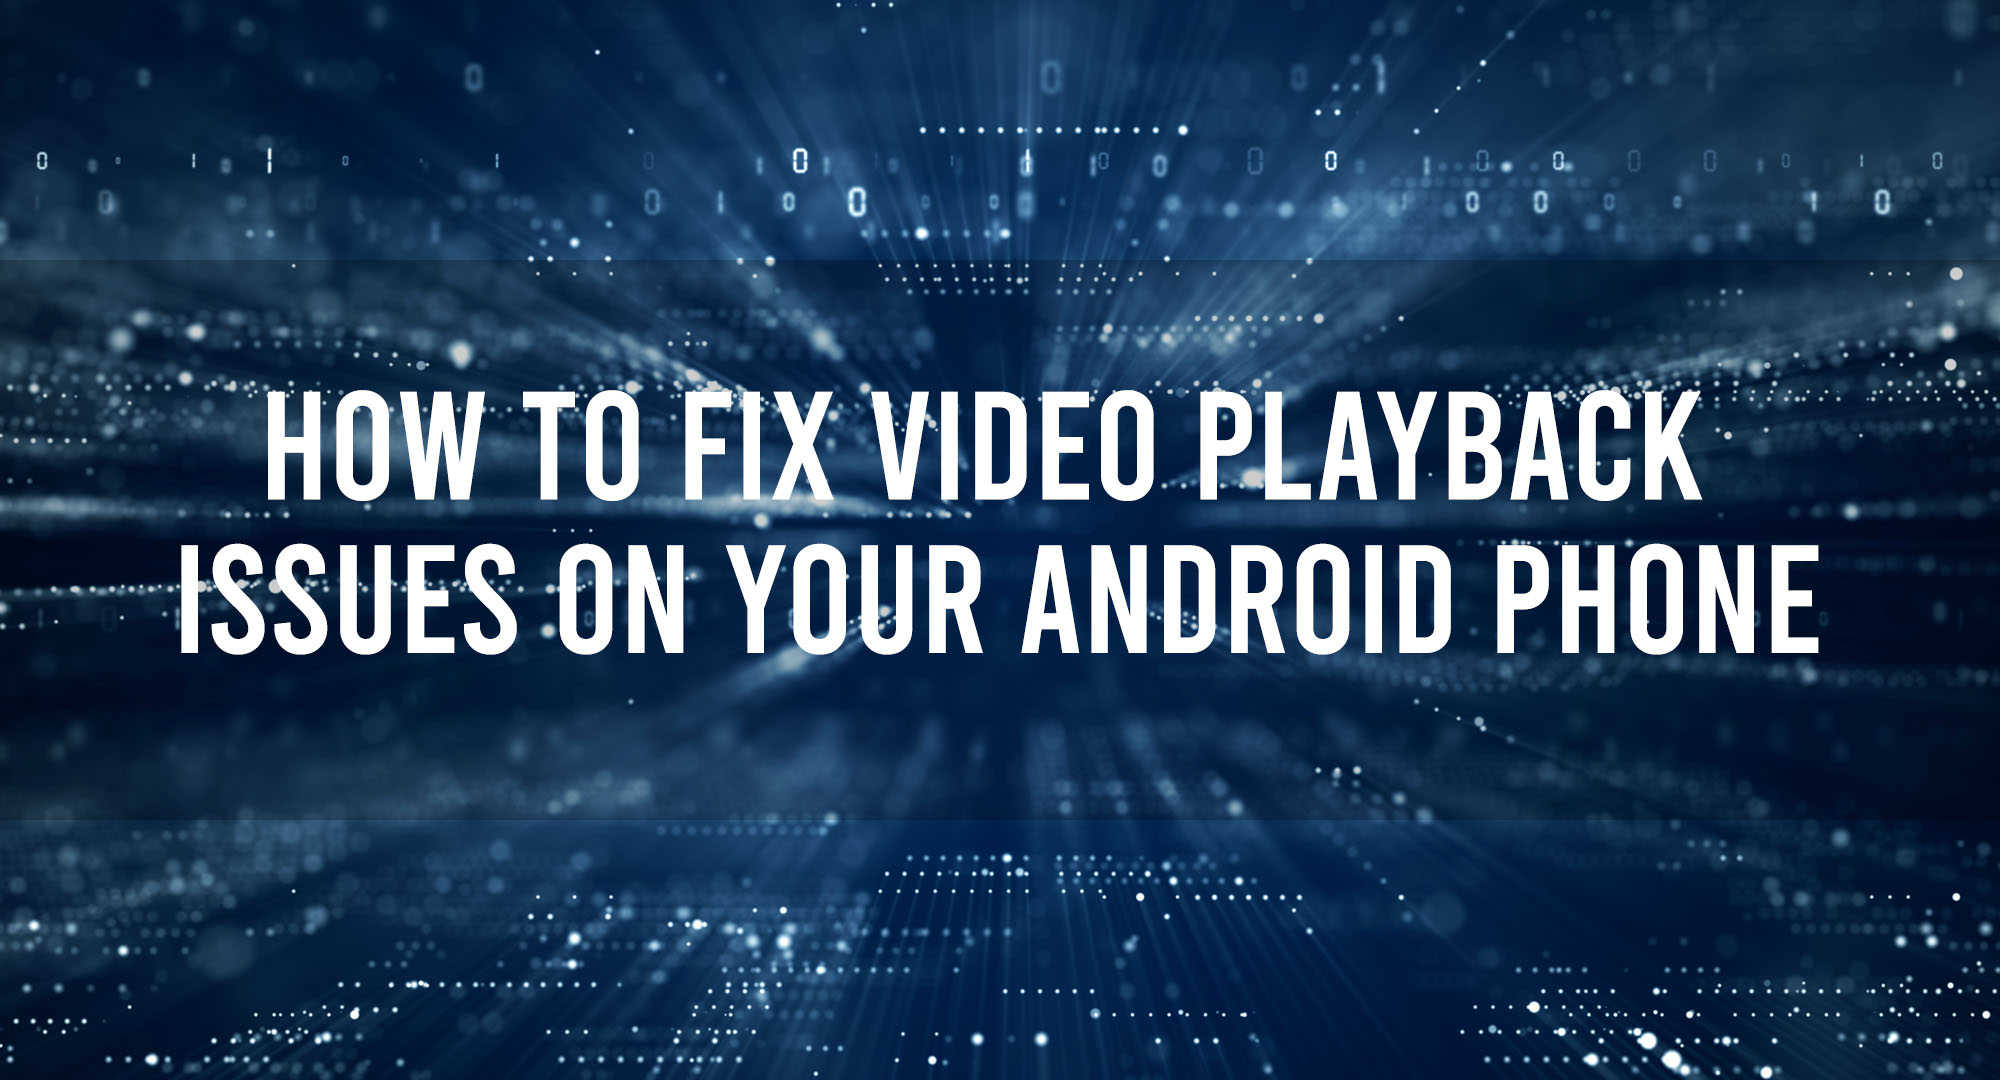 How to Fix Video Playback Issues on Your Android Phone